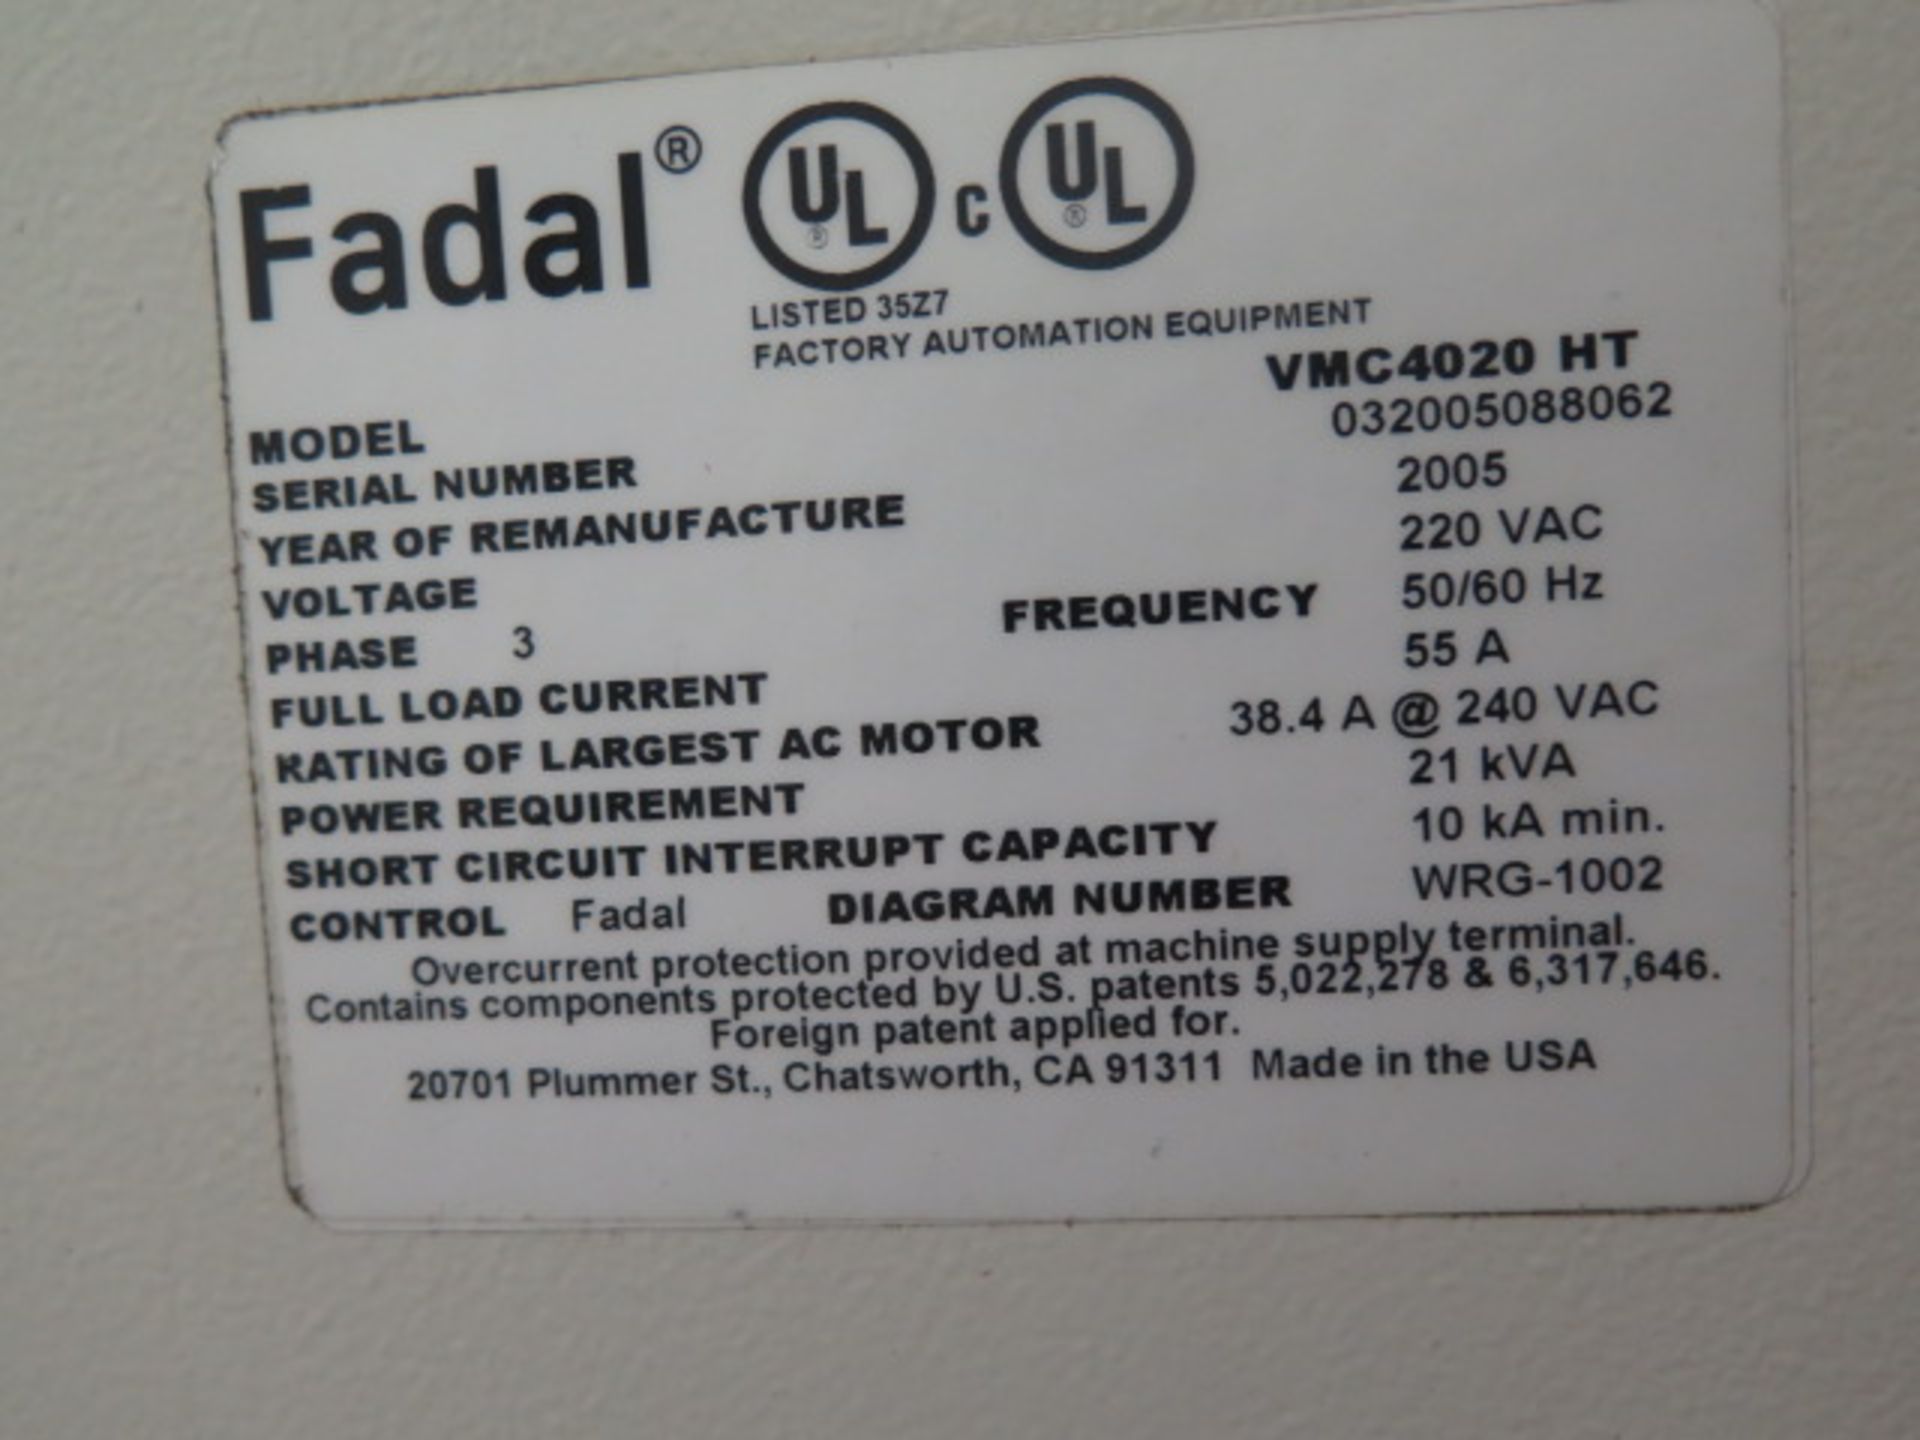 2005 (Remanufactured) Fadal VMC4020HT CNC Vertical Machining Center s/n 032005088062 w/ Fadal - Image 11 of 11